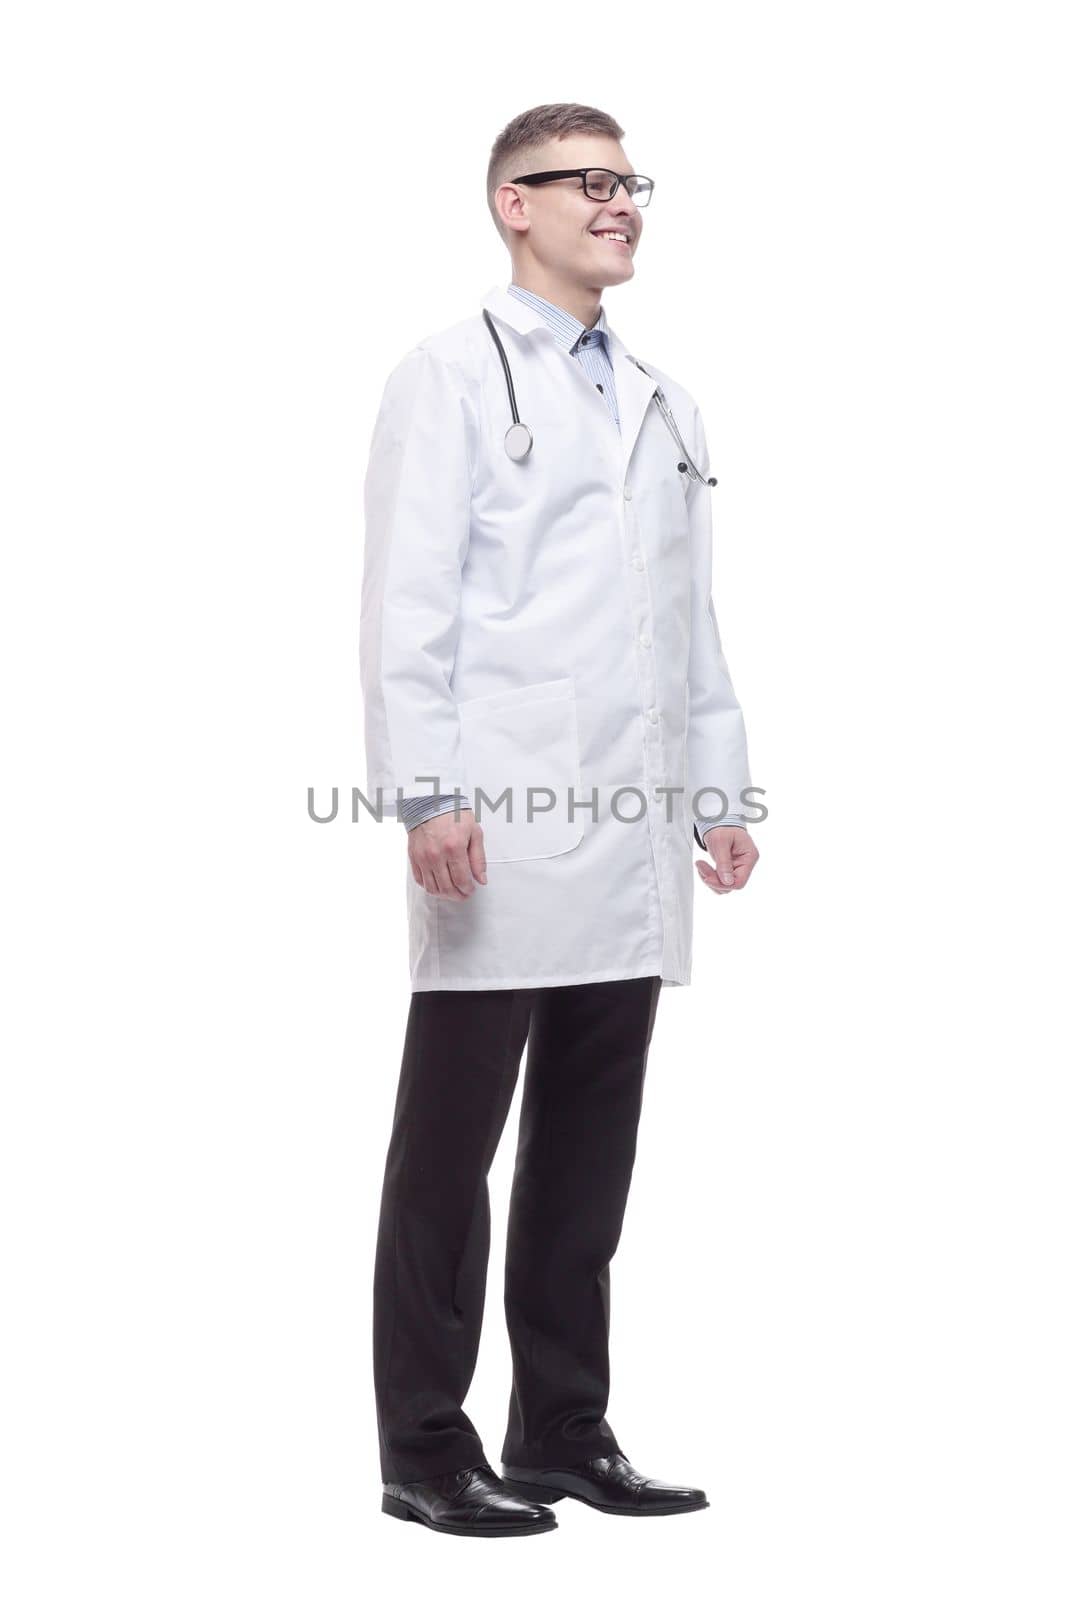 in full growth. confident young doctor with a stethoscope. isolated on a white background.